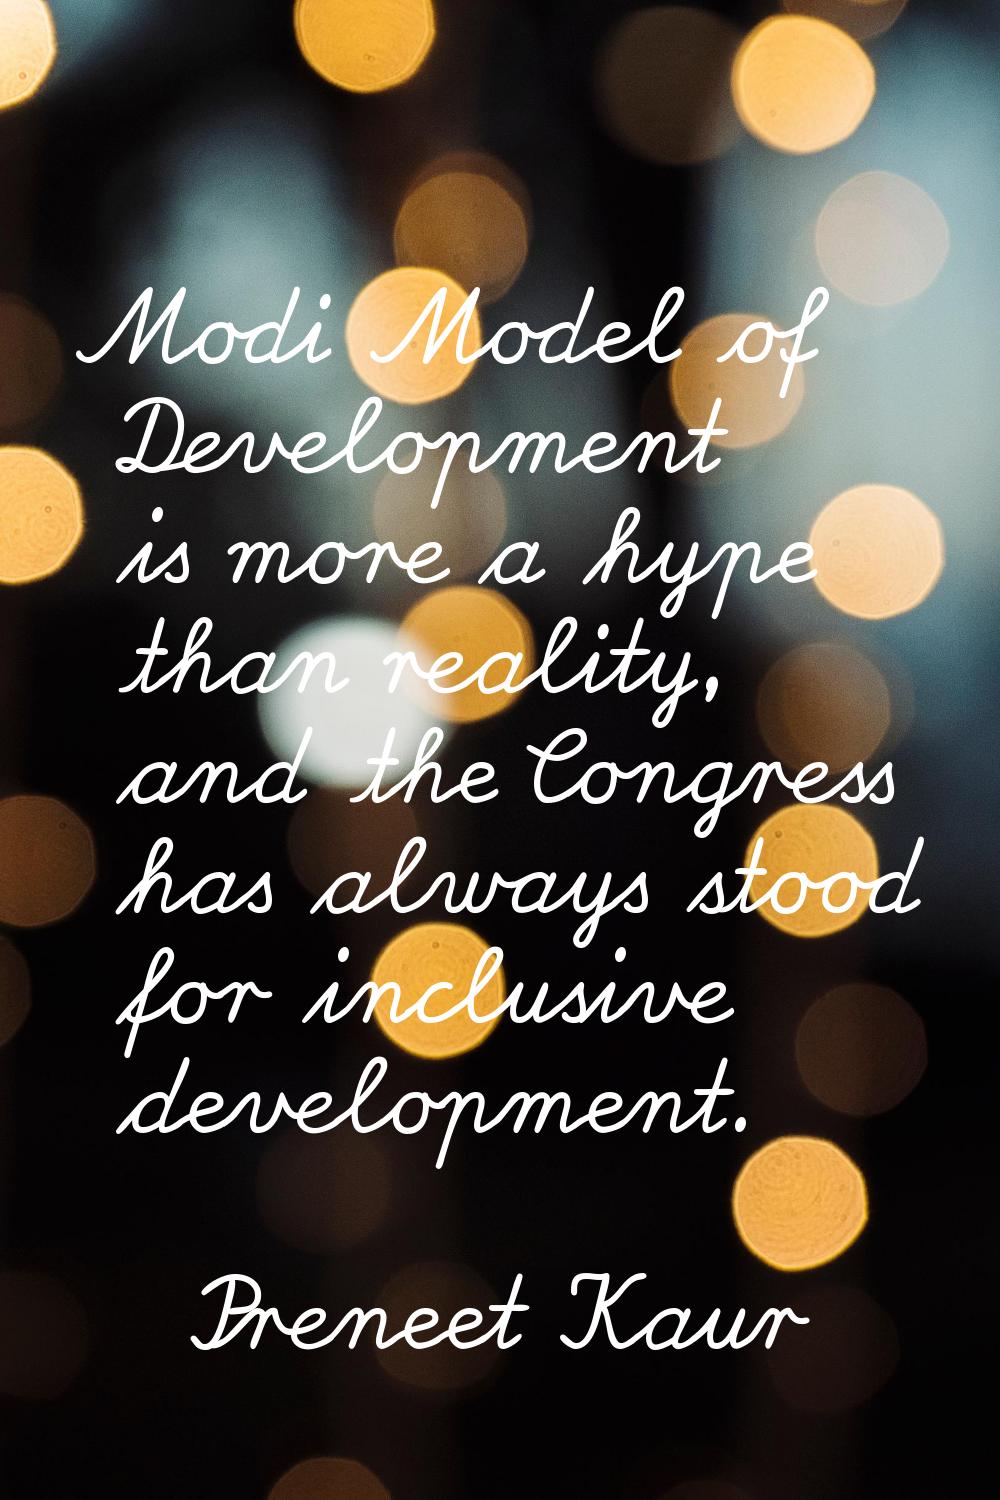 Modi Model of Development is more a hype than reality, and the Congress has always stood for inclus